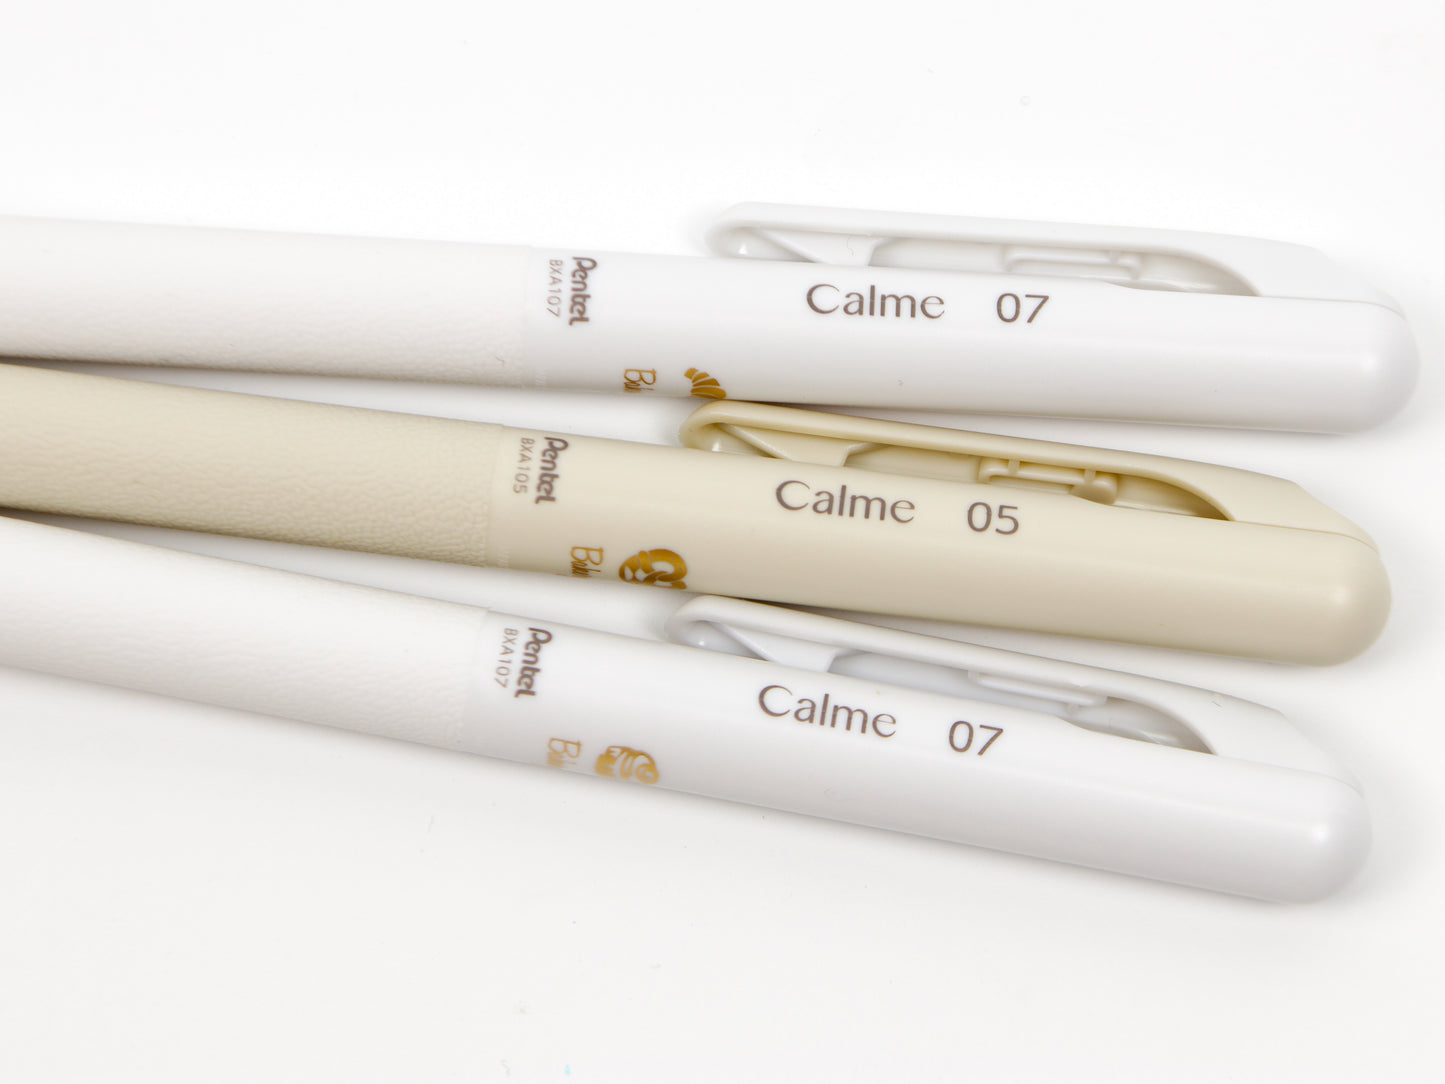 Pentel Calme Bakery and Cafe Limited Edition